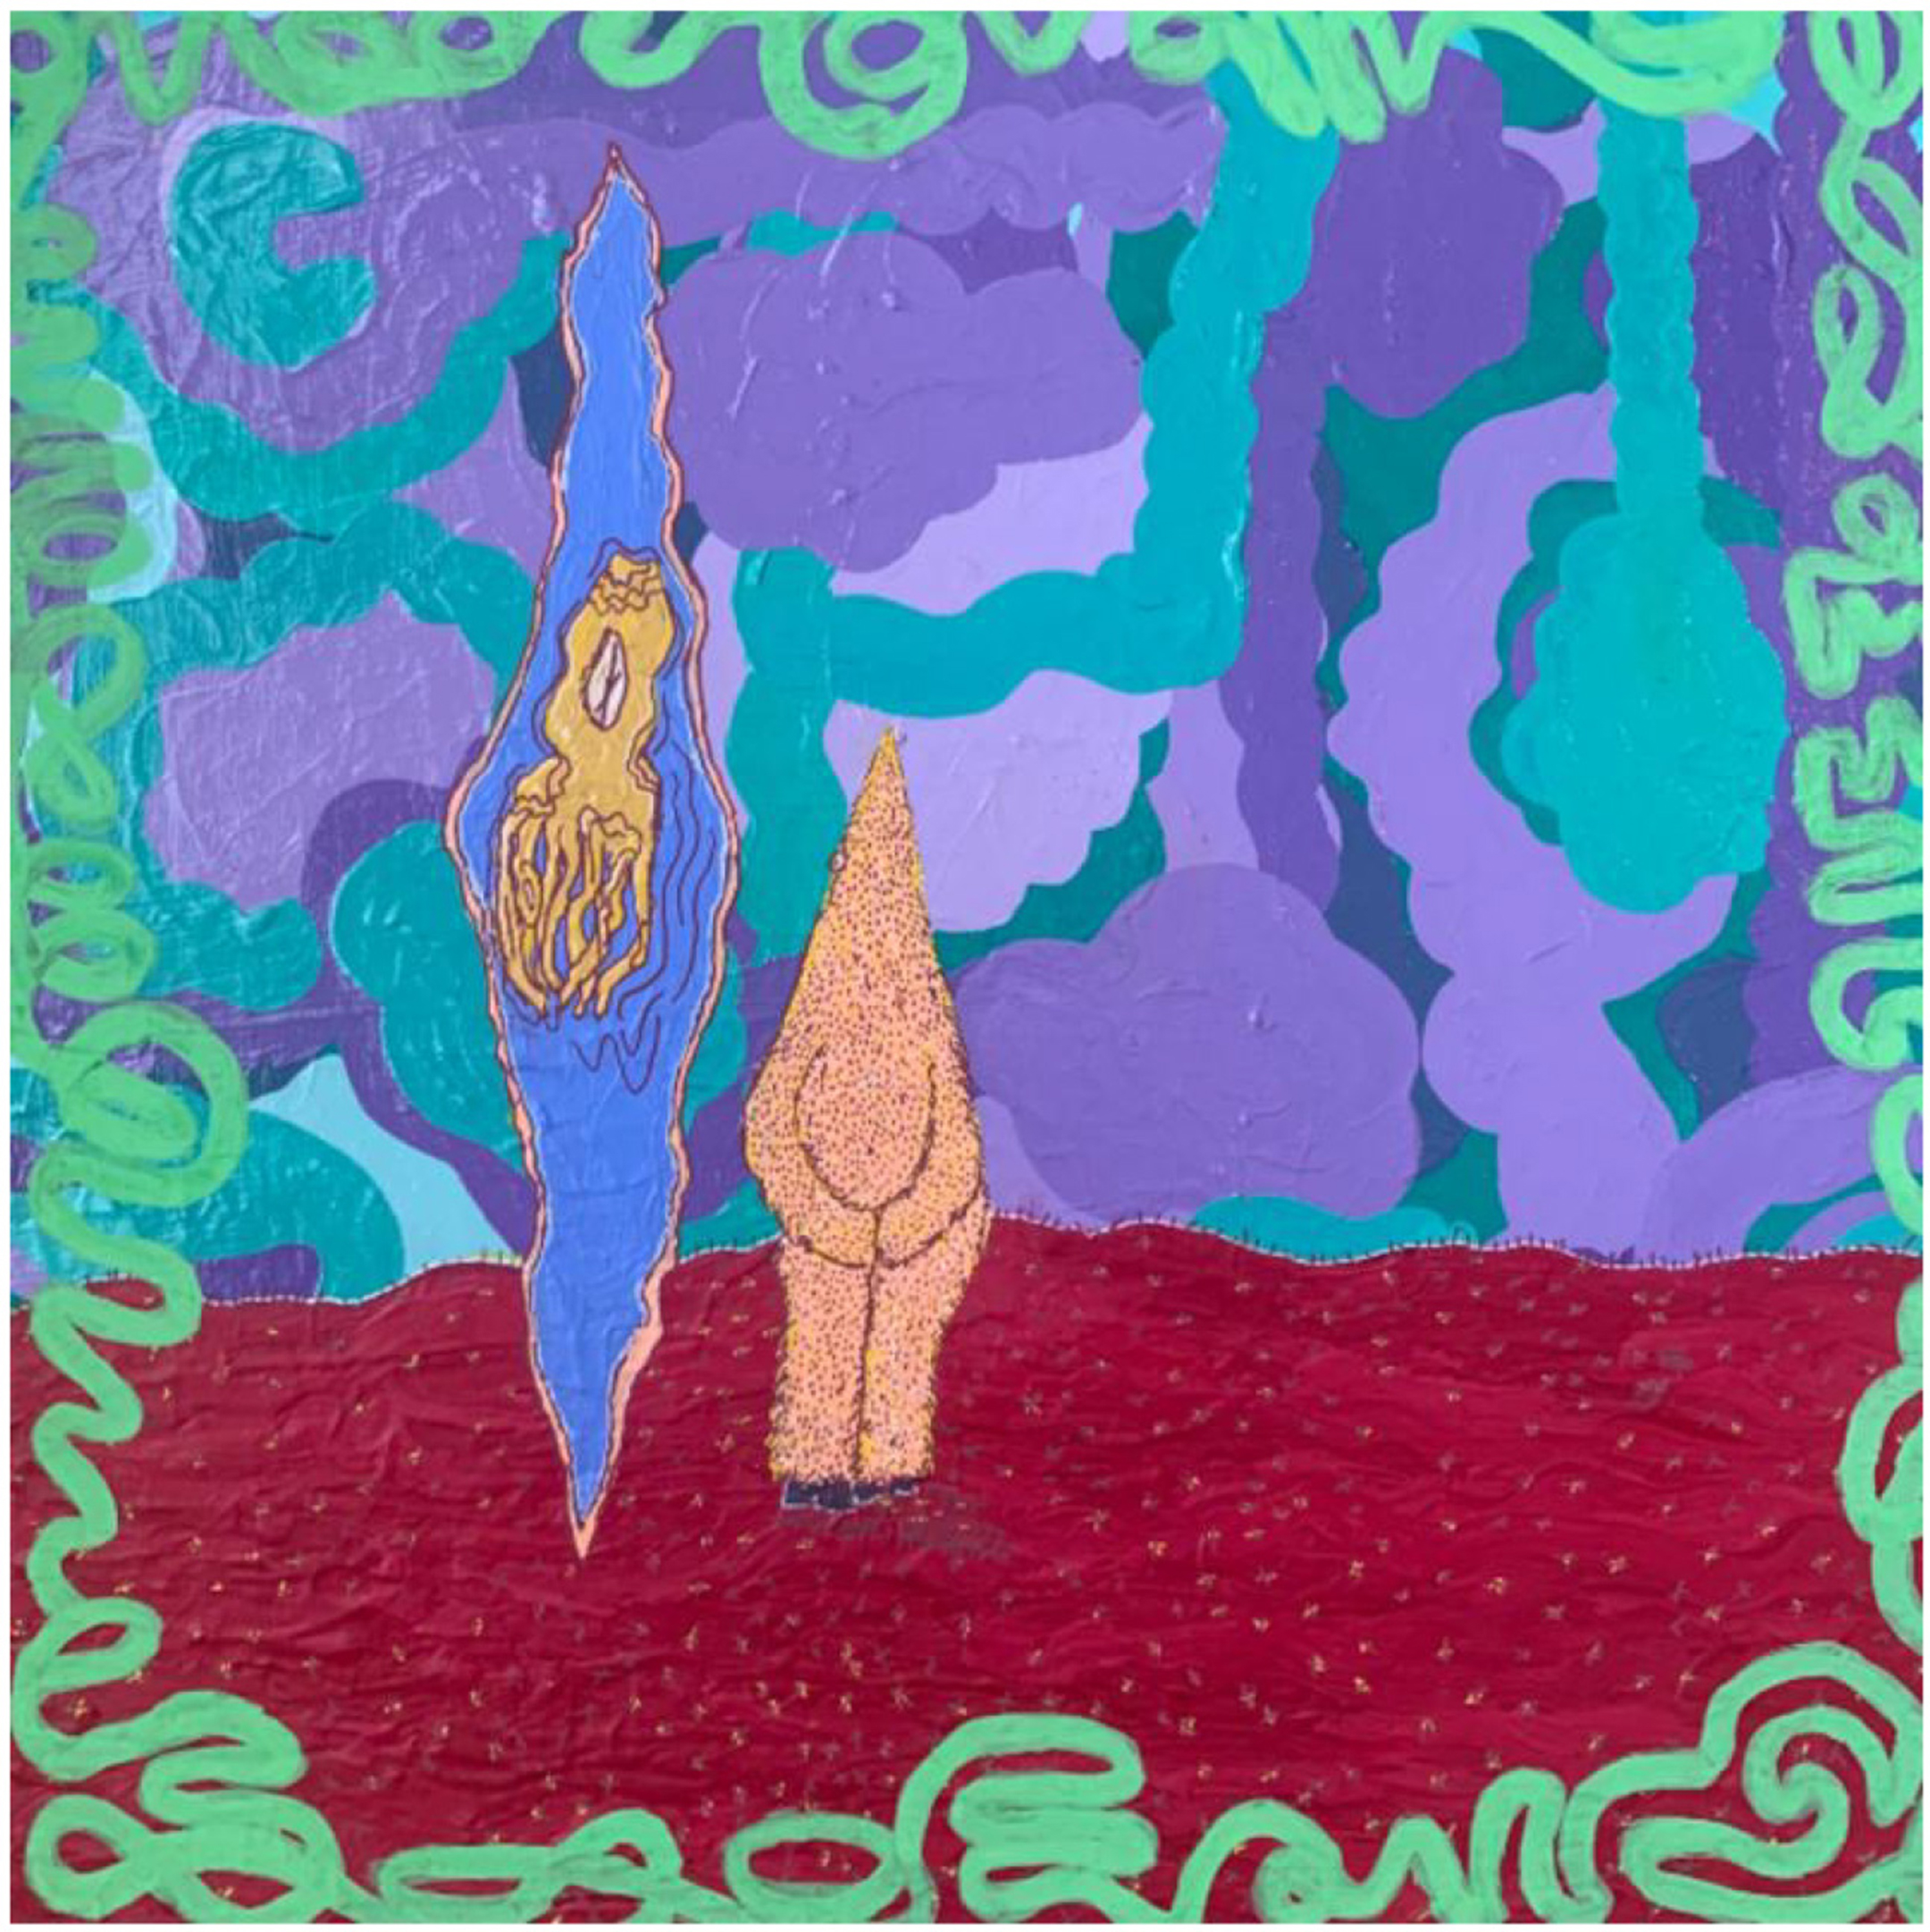 Painting of angular alien in peach and pink standing on a red ground looking at a green, purple and blue sky